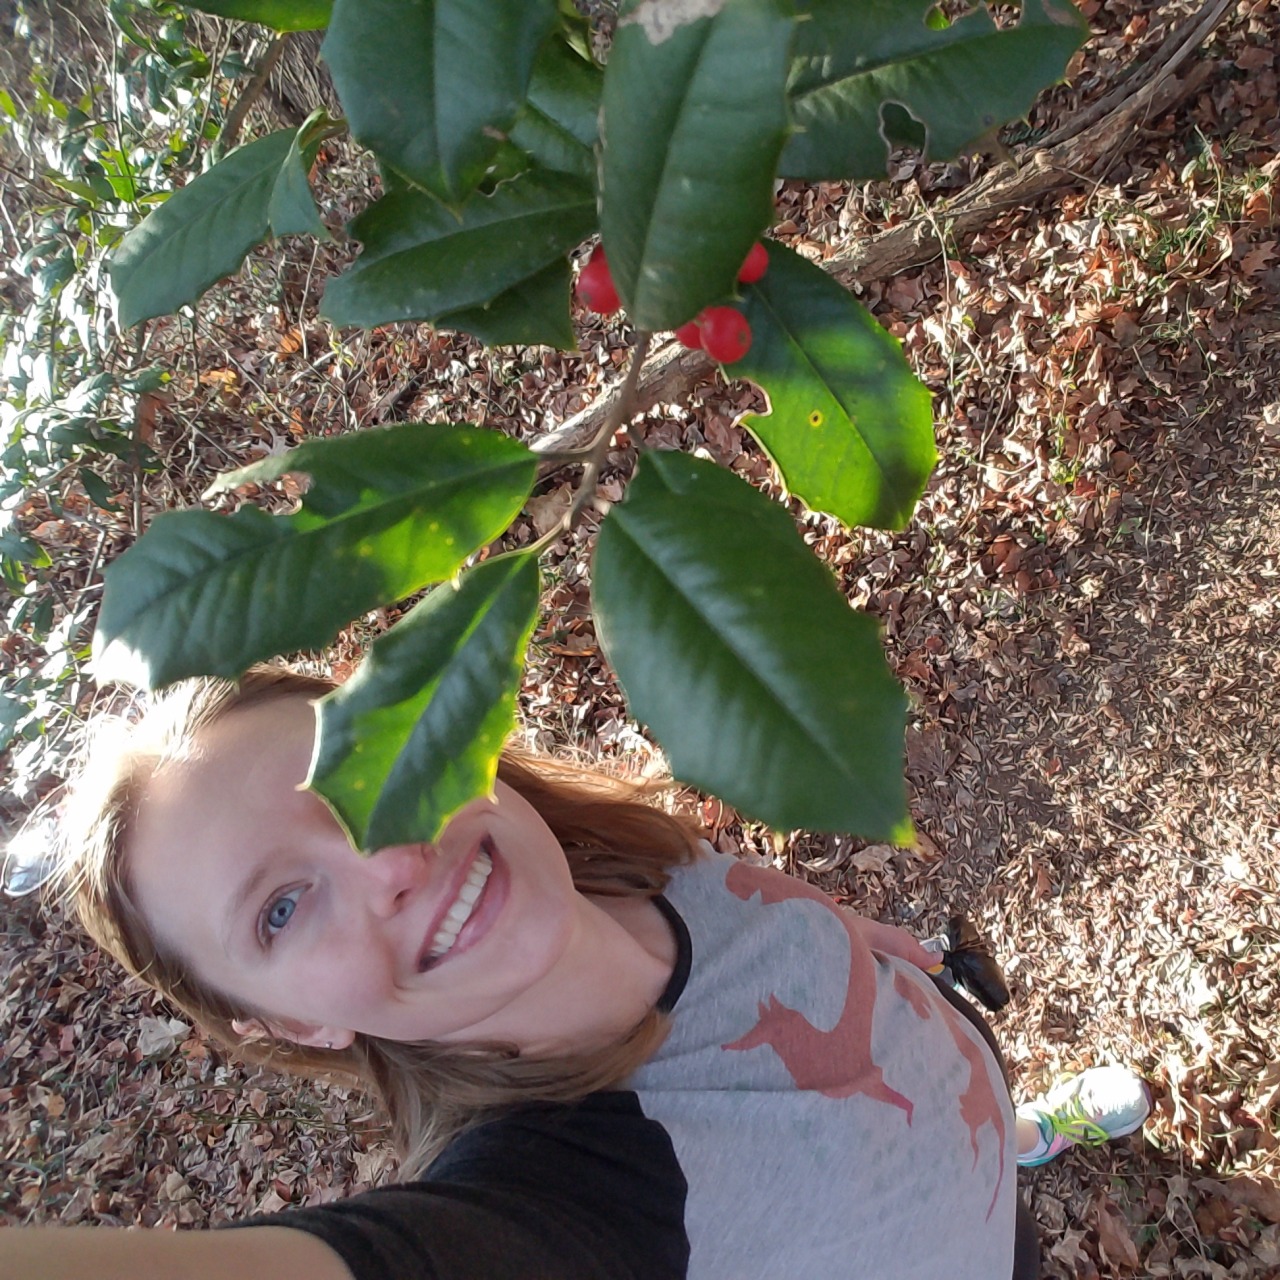 Merry Christmas! It was warm and sunny but at least I found some holly berries in